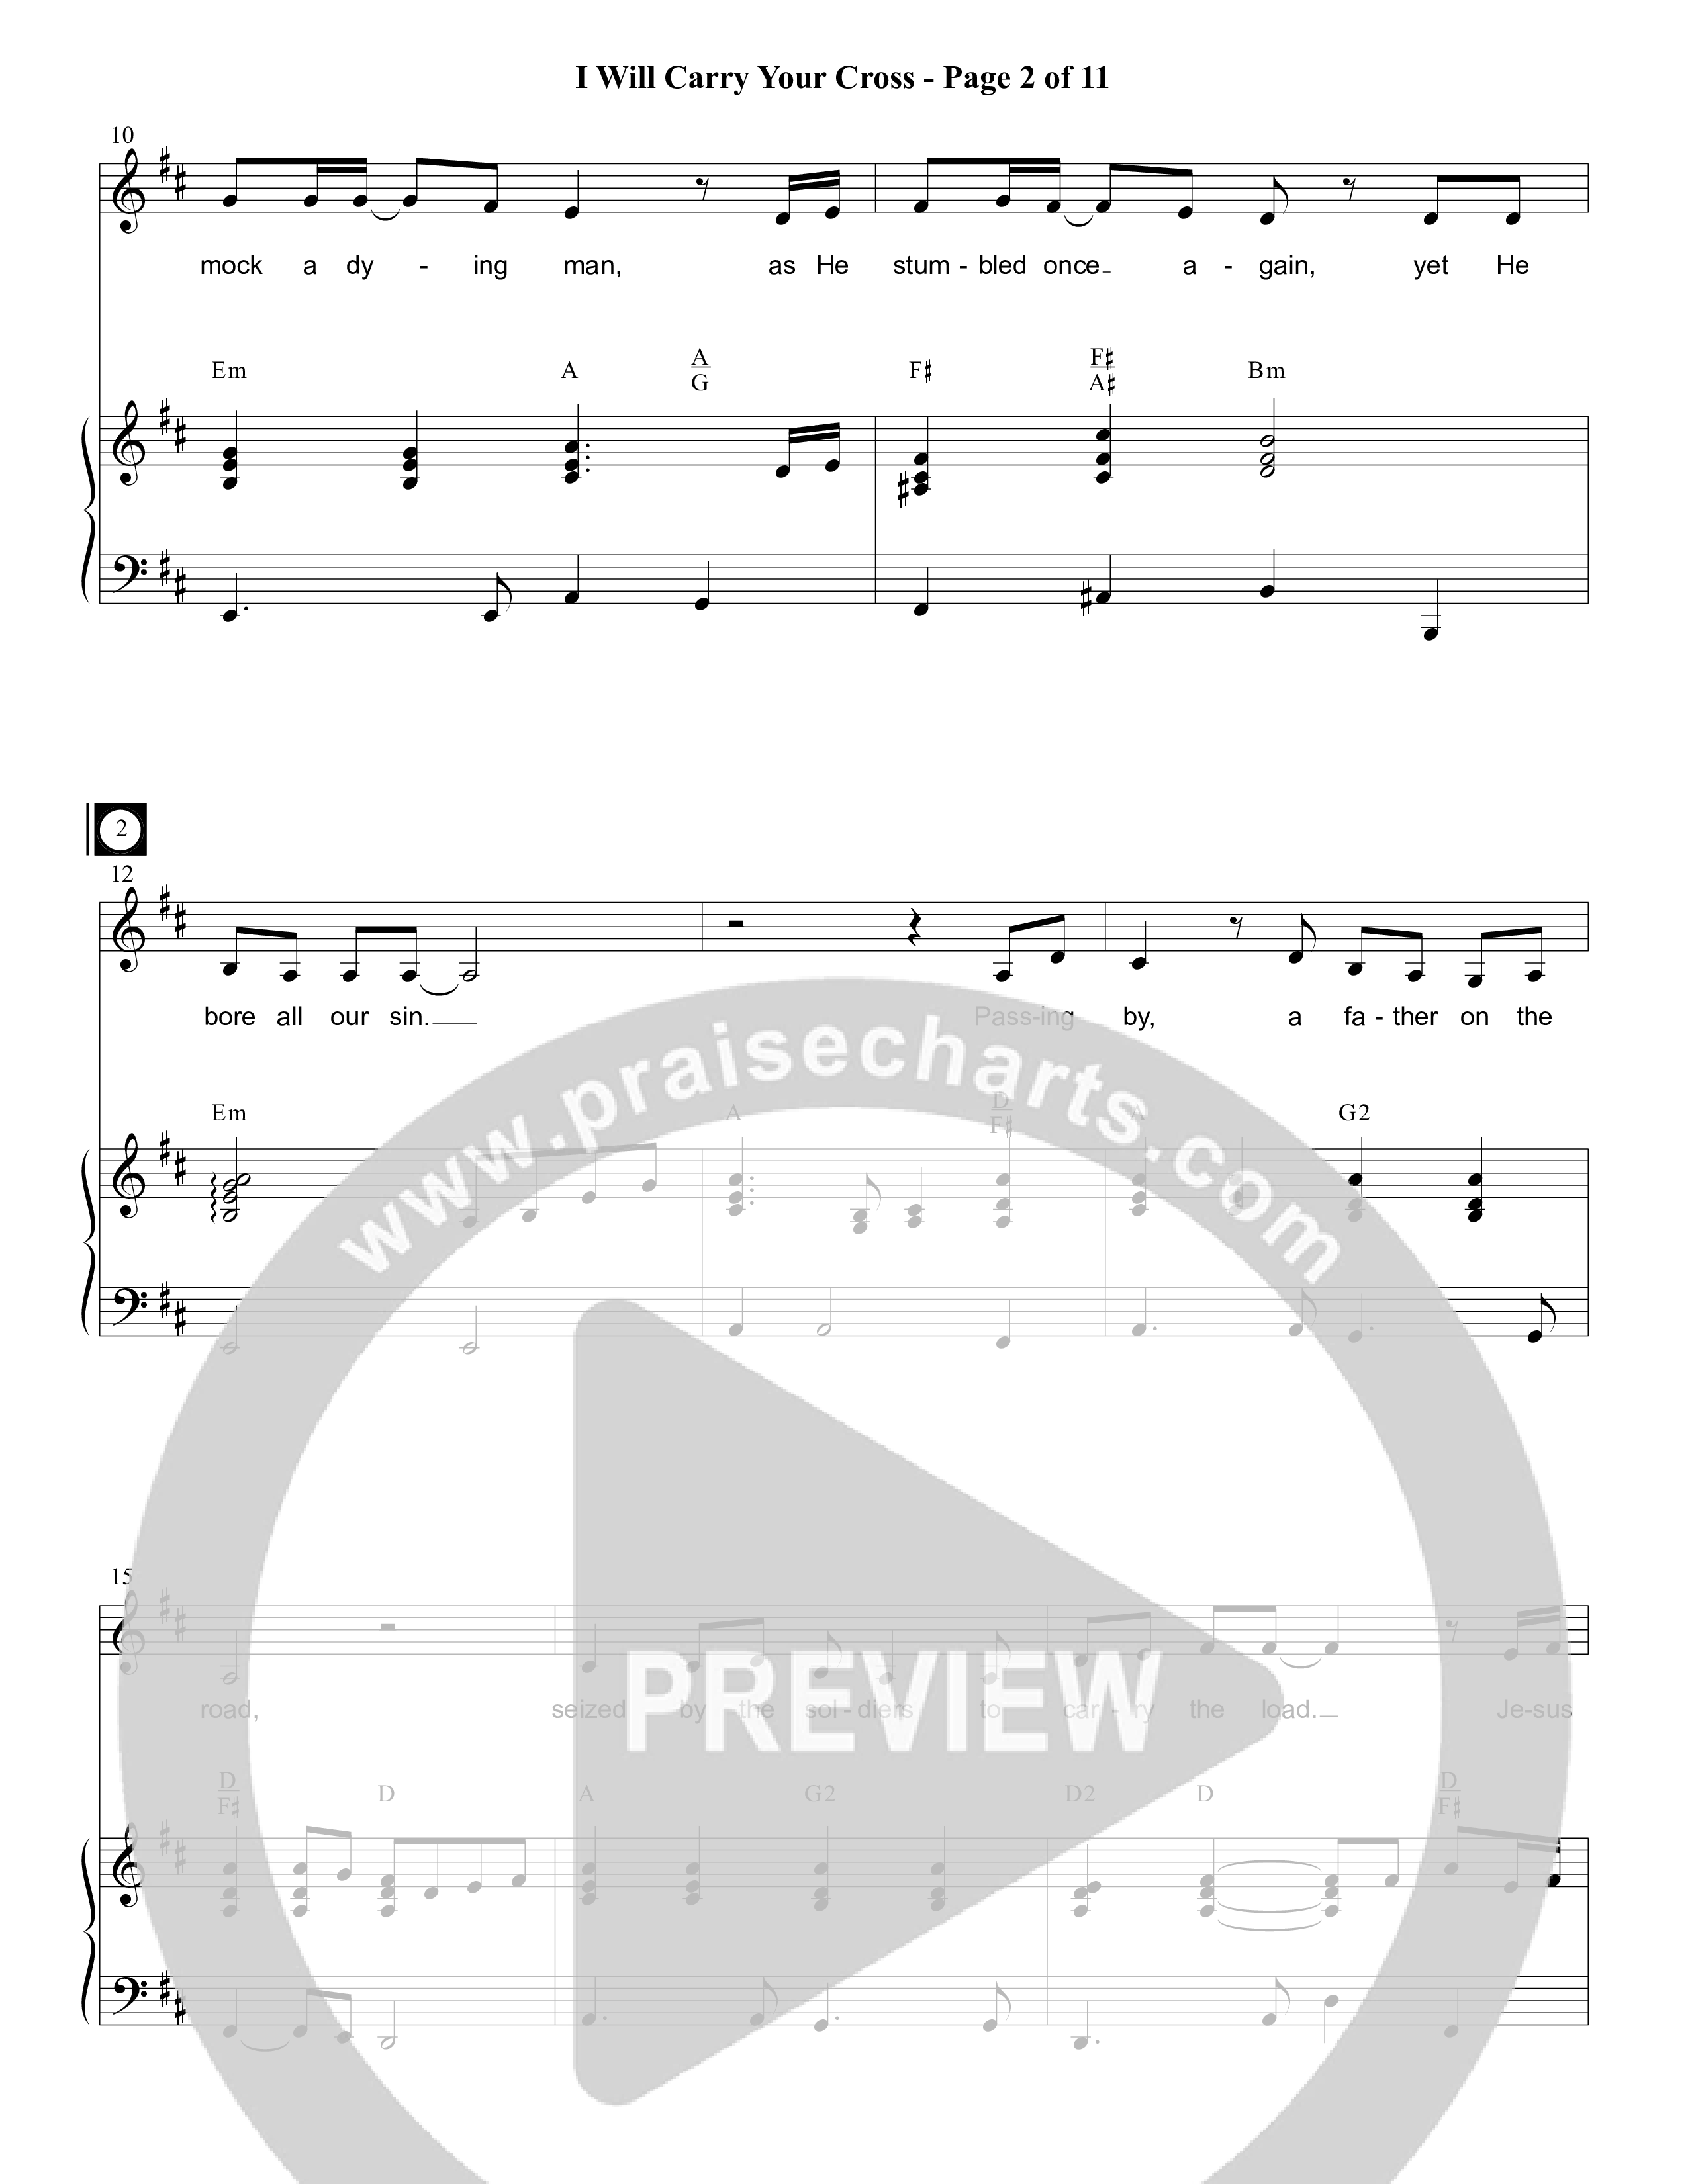 I Will Carry Your Cross (Choral Anthem SATB) Piano/Choir (SATB) (Foster Music Group / Arr. Marty Parks)